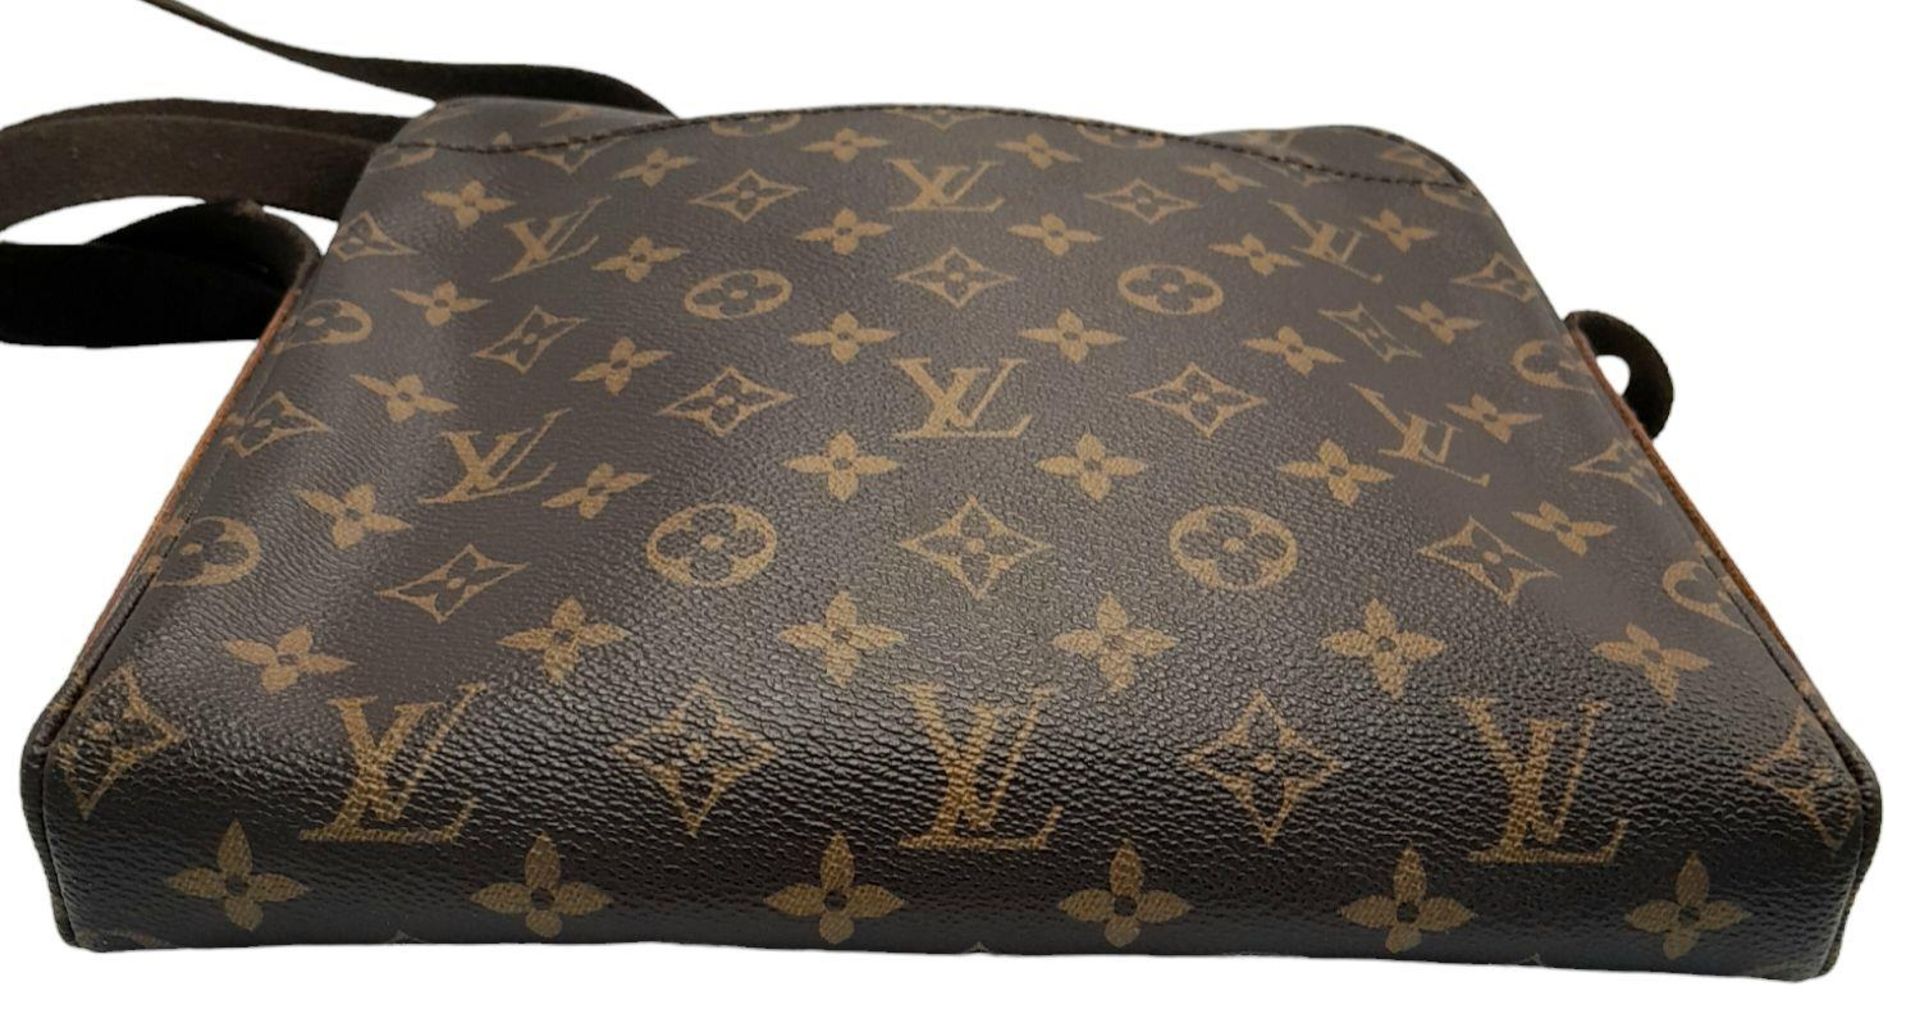 A Louis Vuitton Trotteur Beaubourg Satchel Bag. Monogramed canvas exterior with gold-toned hardware, - Image 5 of 9